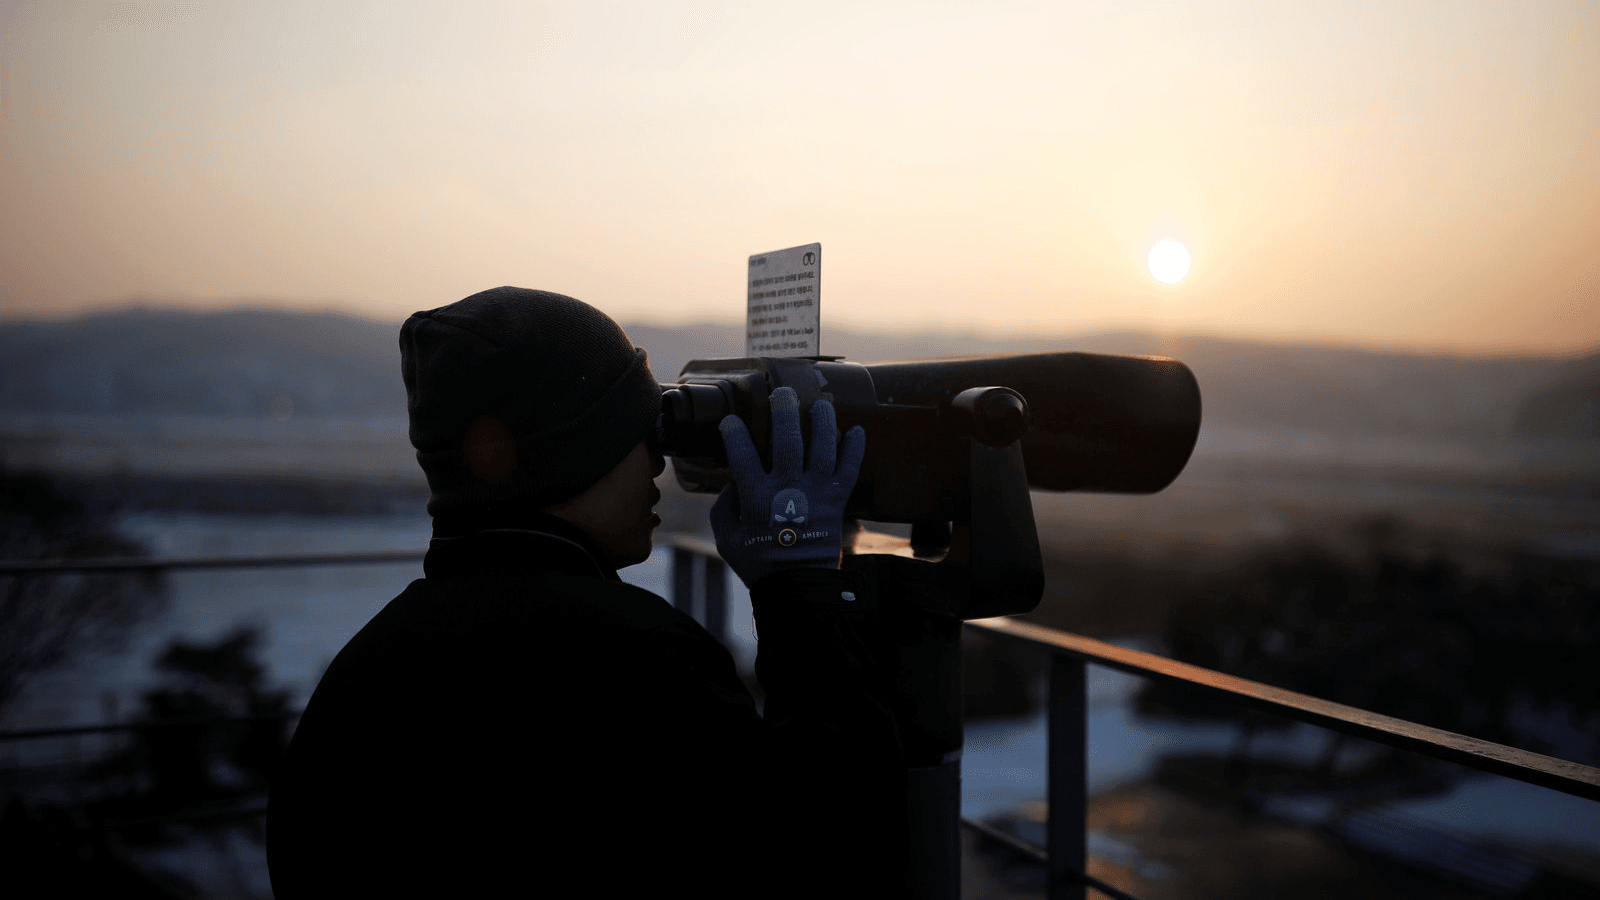 A man looks toward the north through a pair of binoculars near the demilitarized zone separating the two Koreas, in Paju, South Korea, Dec. 21, 2017.